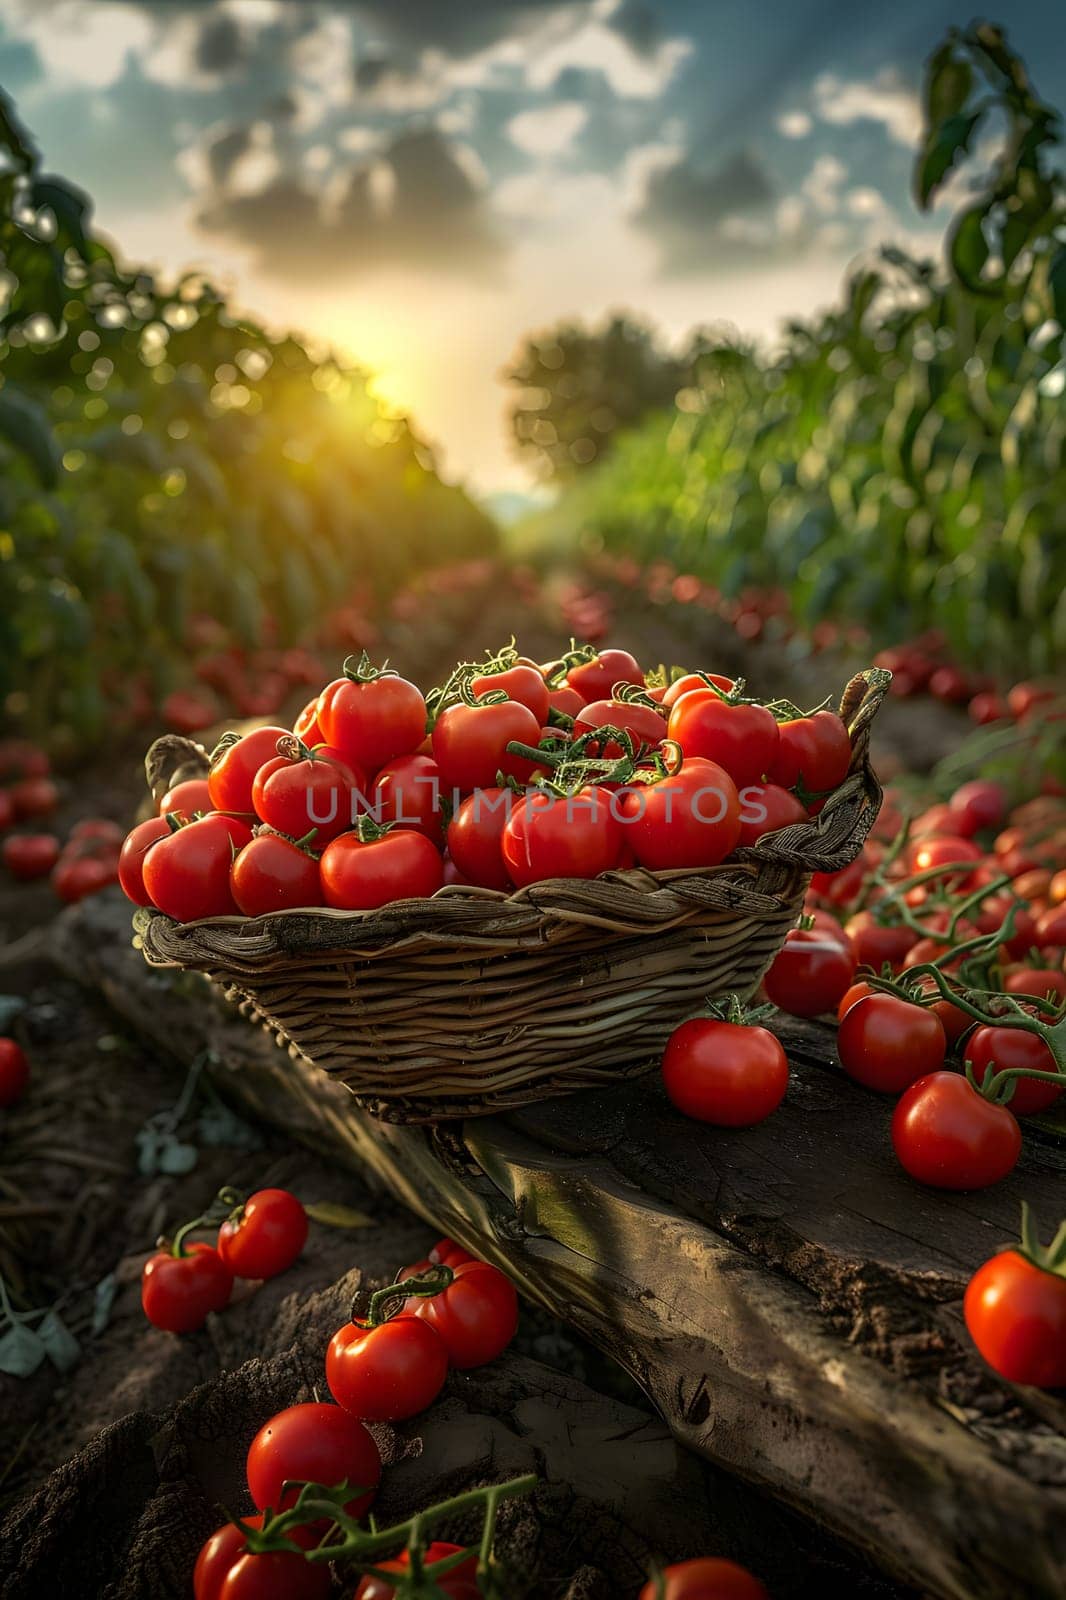 A basket filled with cherry tomatoes is placed on a table in a field under a blue sky with white clouds. The tomatoes are natural foods grown on a plant